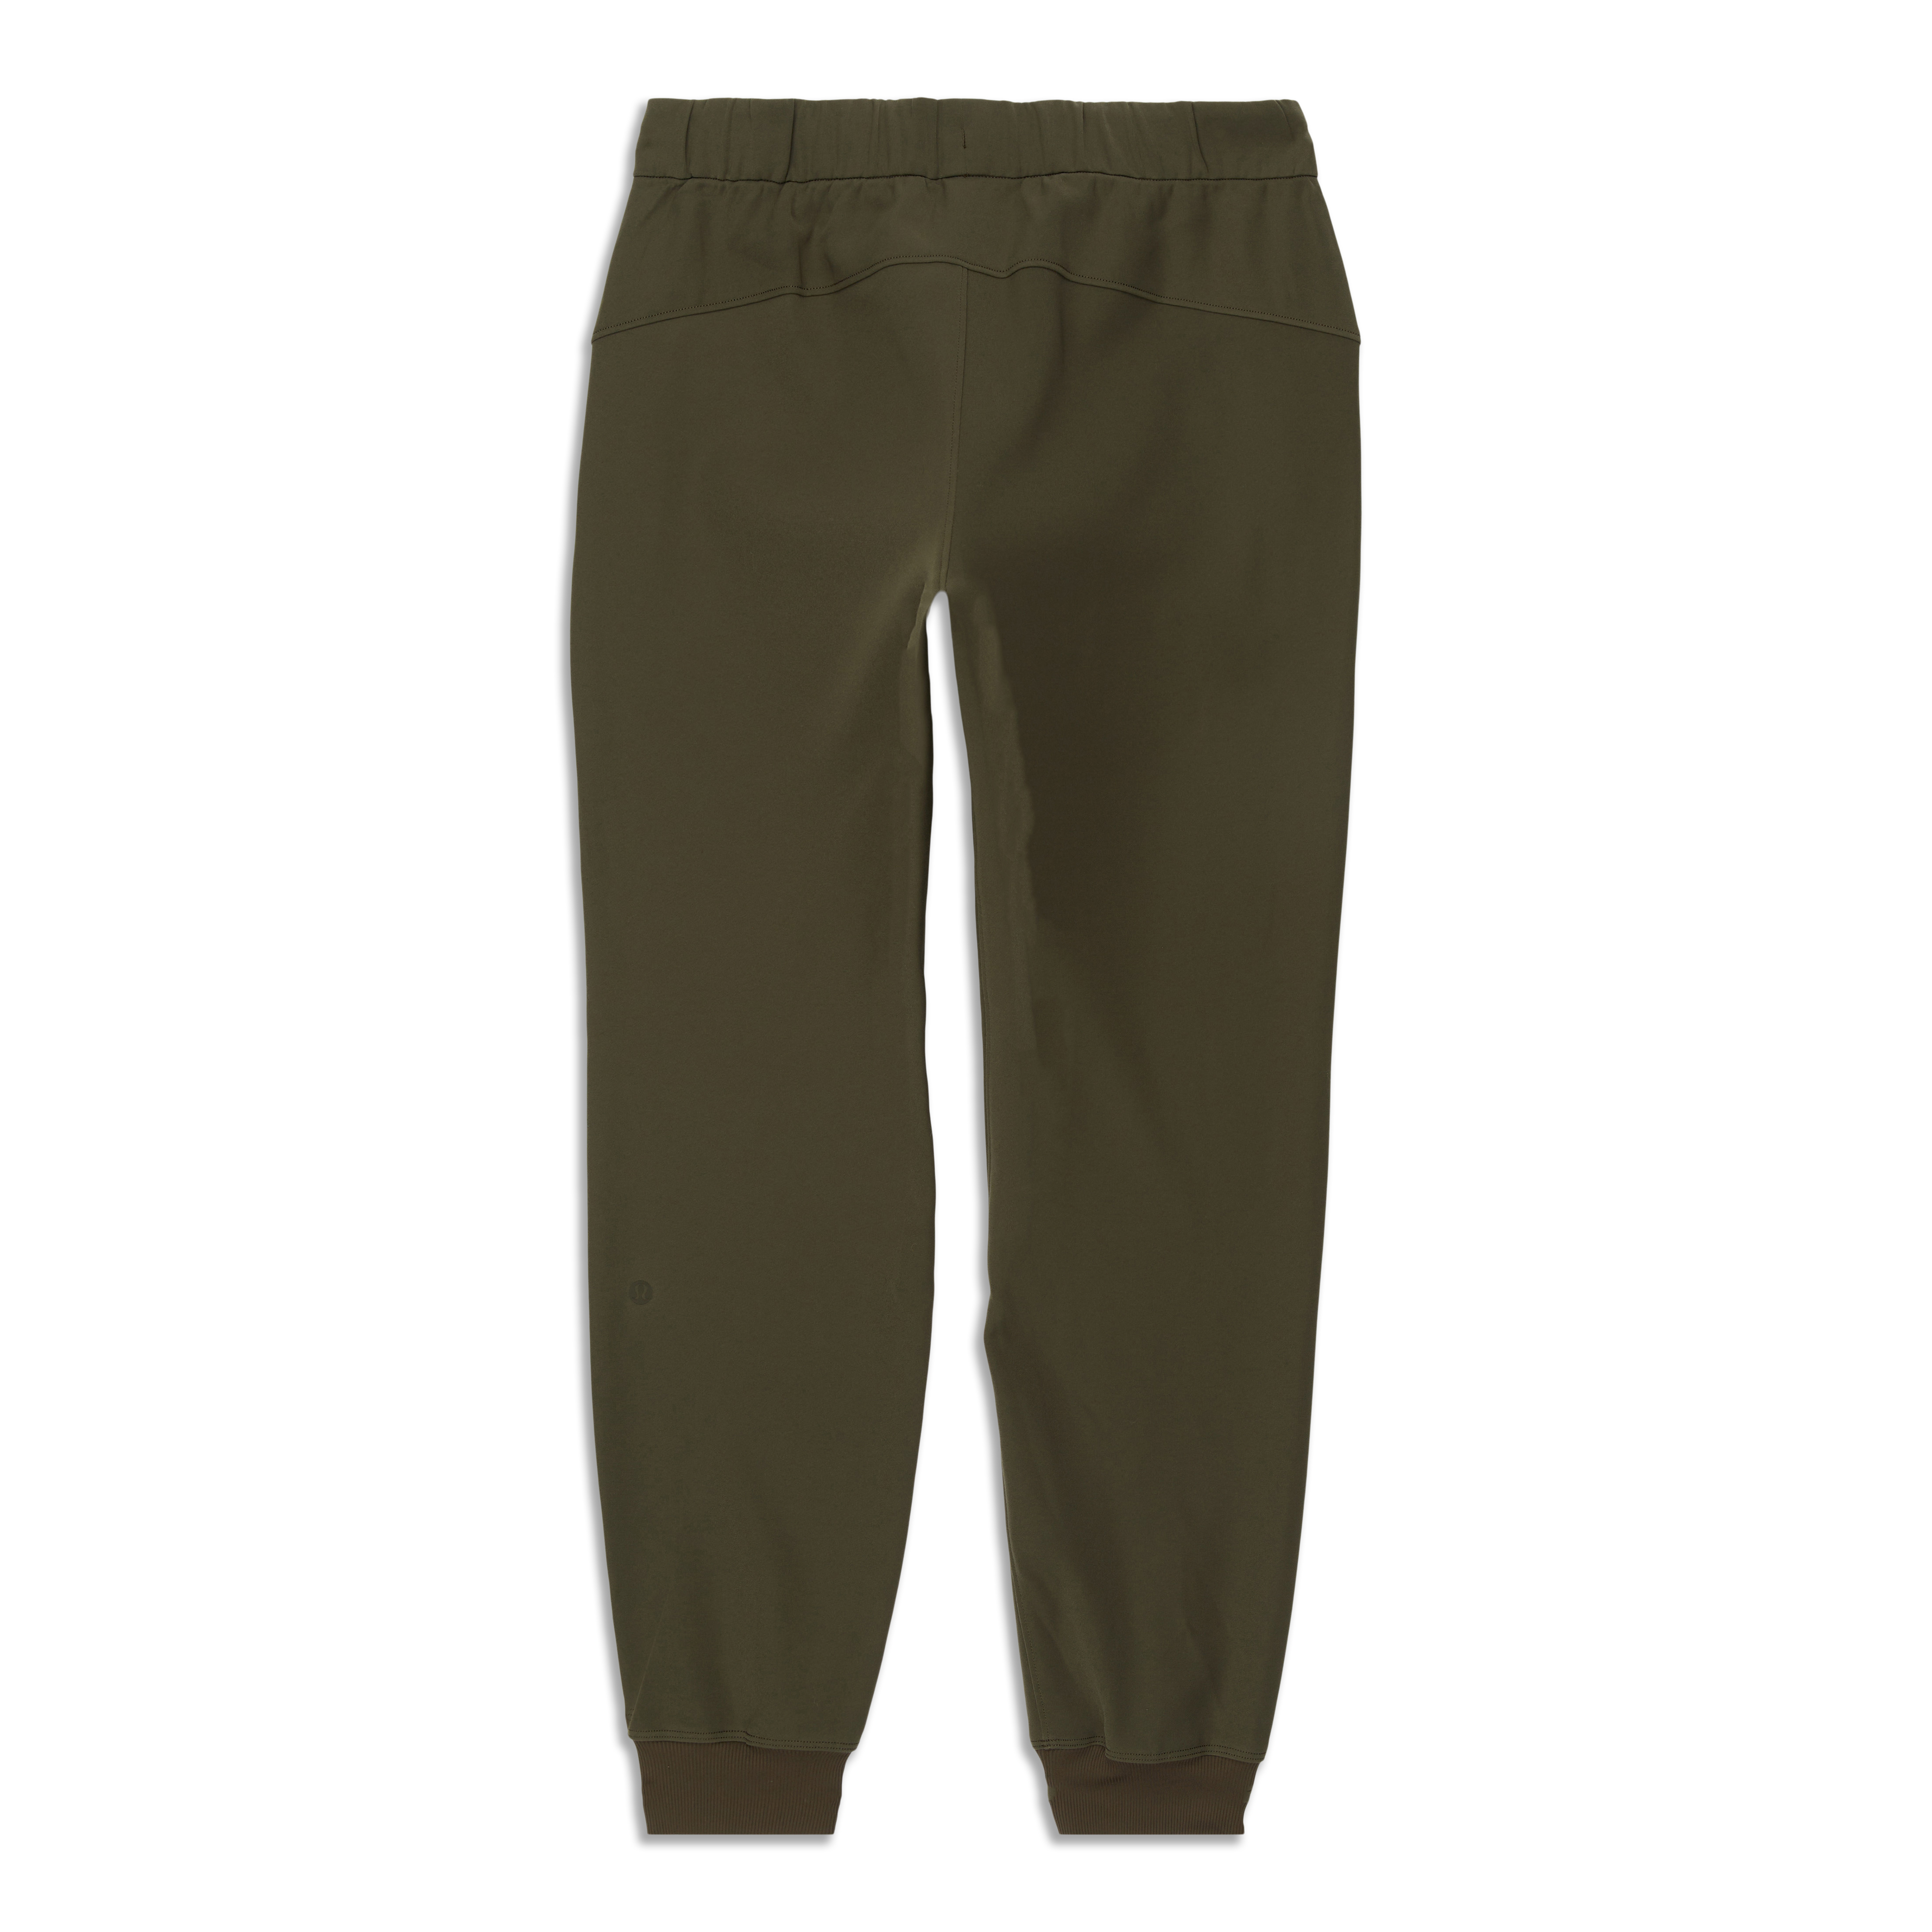 My favorite joggers ever! On The Fly Jogger (8) and Emerald Long